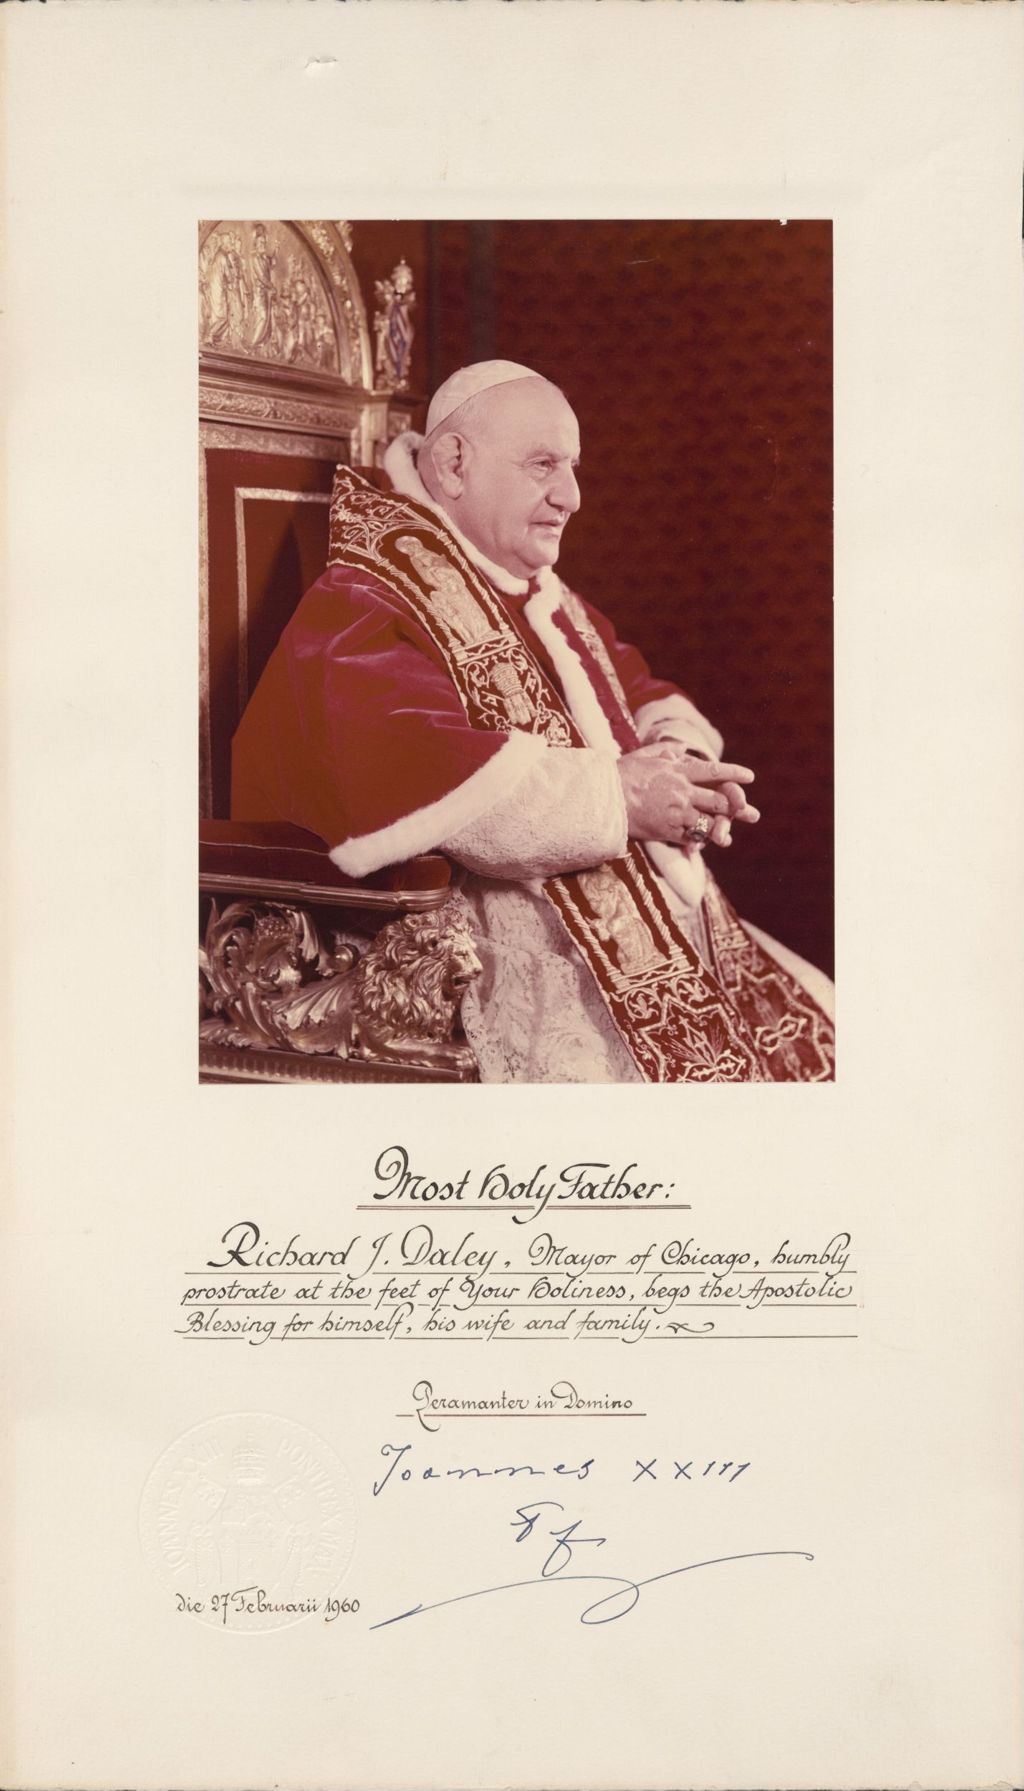 Papal blessing card from Pope John XXII for Richard J. Daley and family